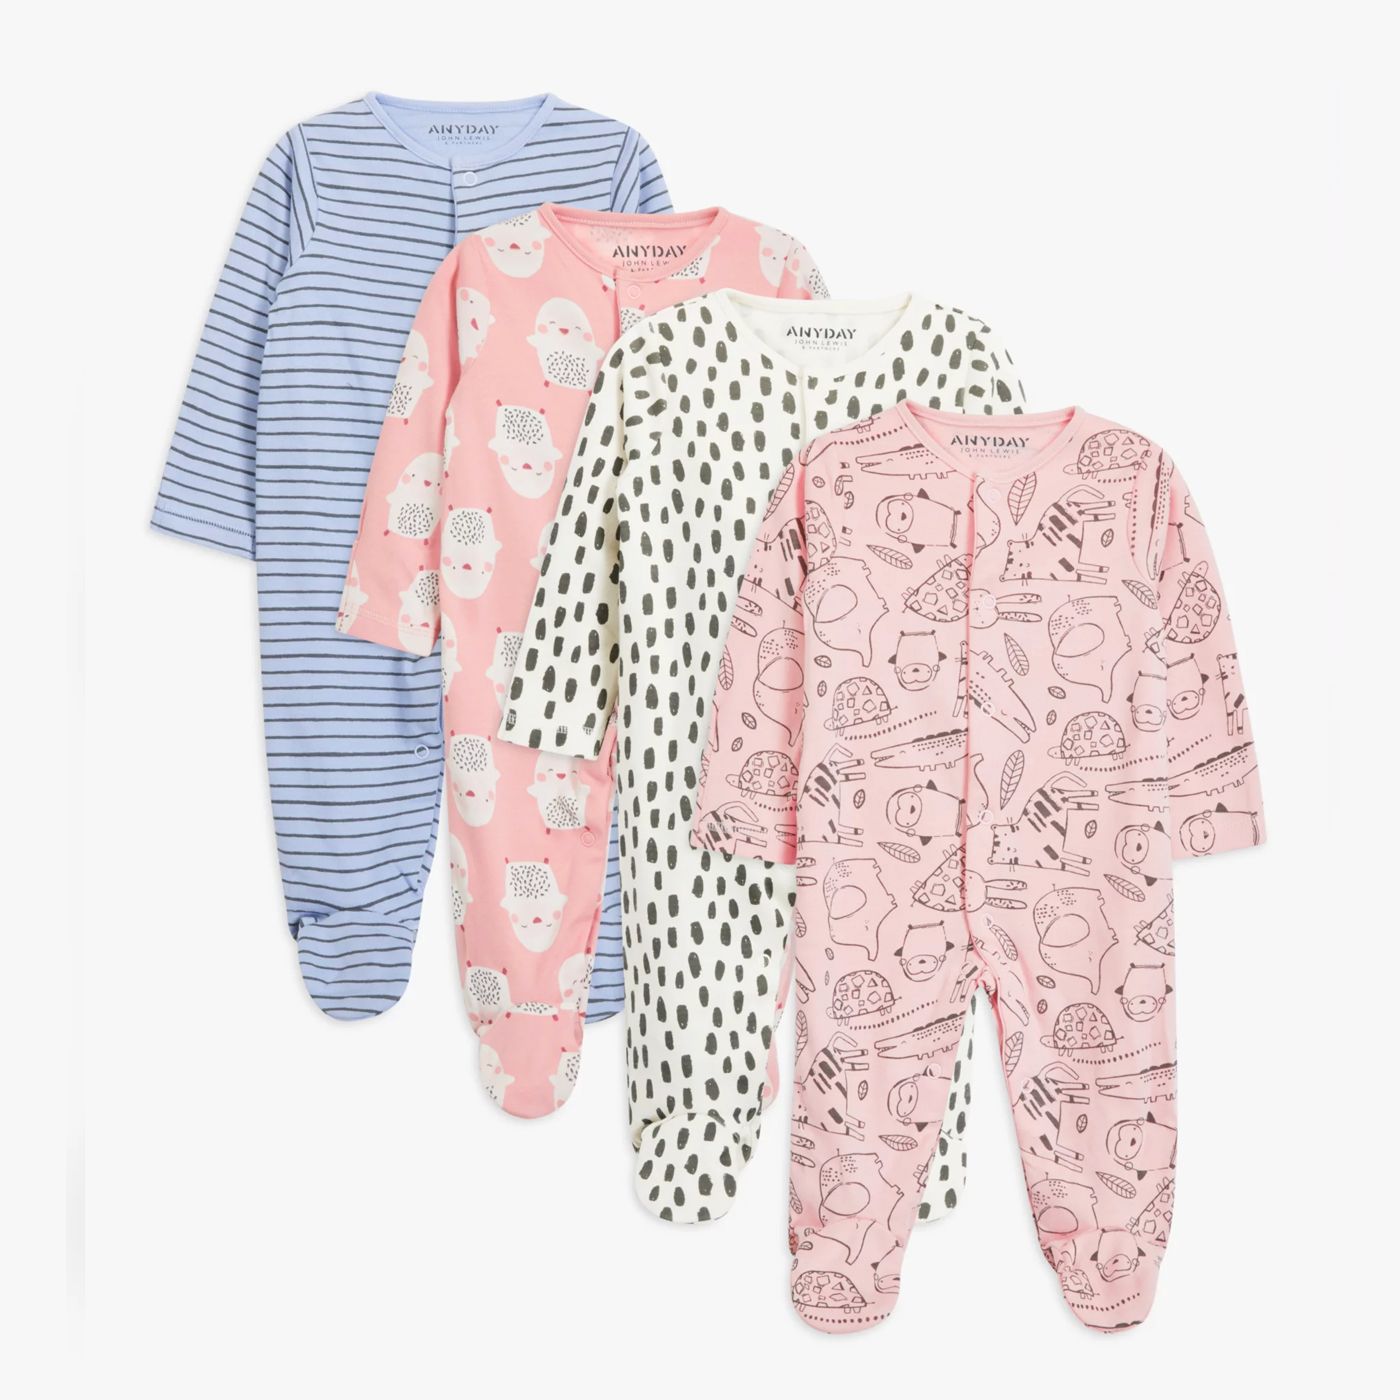 John Lewis John Lewis 3 Pack Baby Flower Hearts Cotton Sleepsuits Age 3-6 Months *BNWT* 